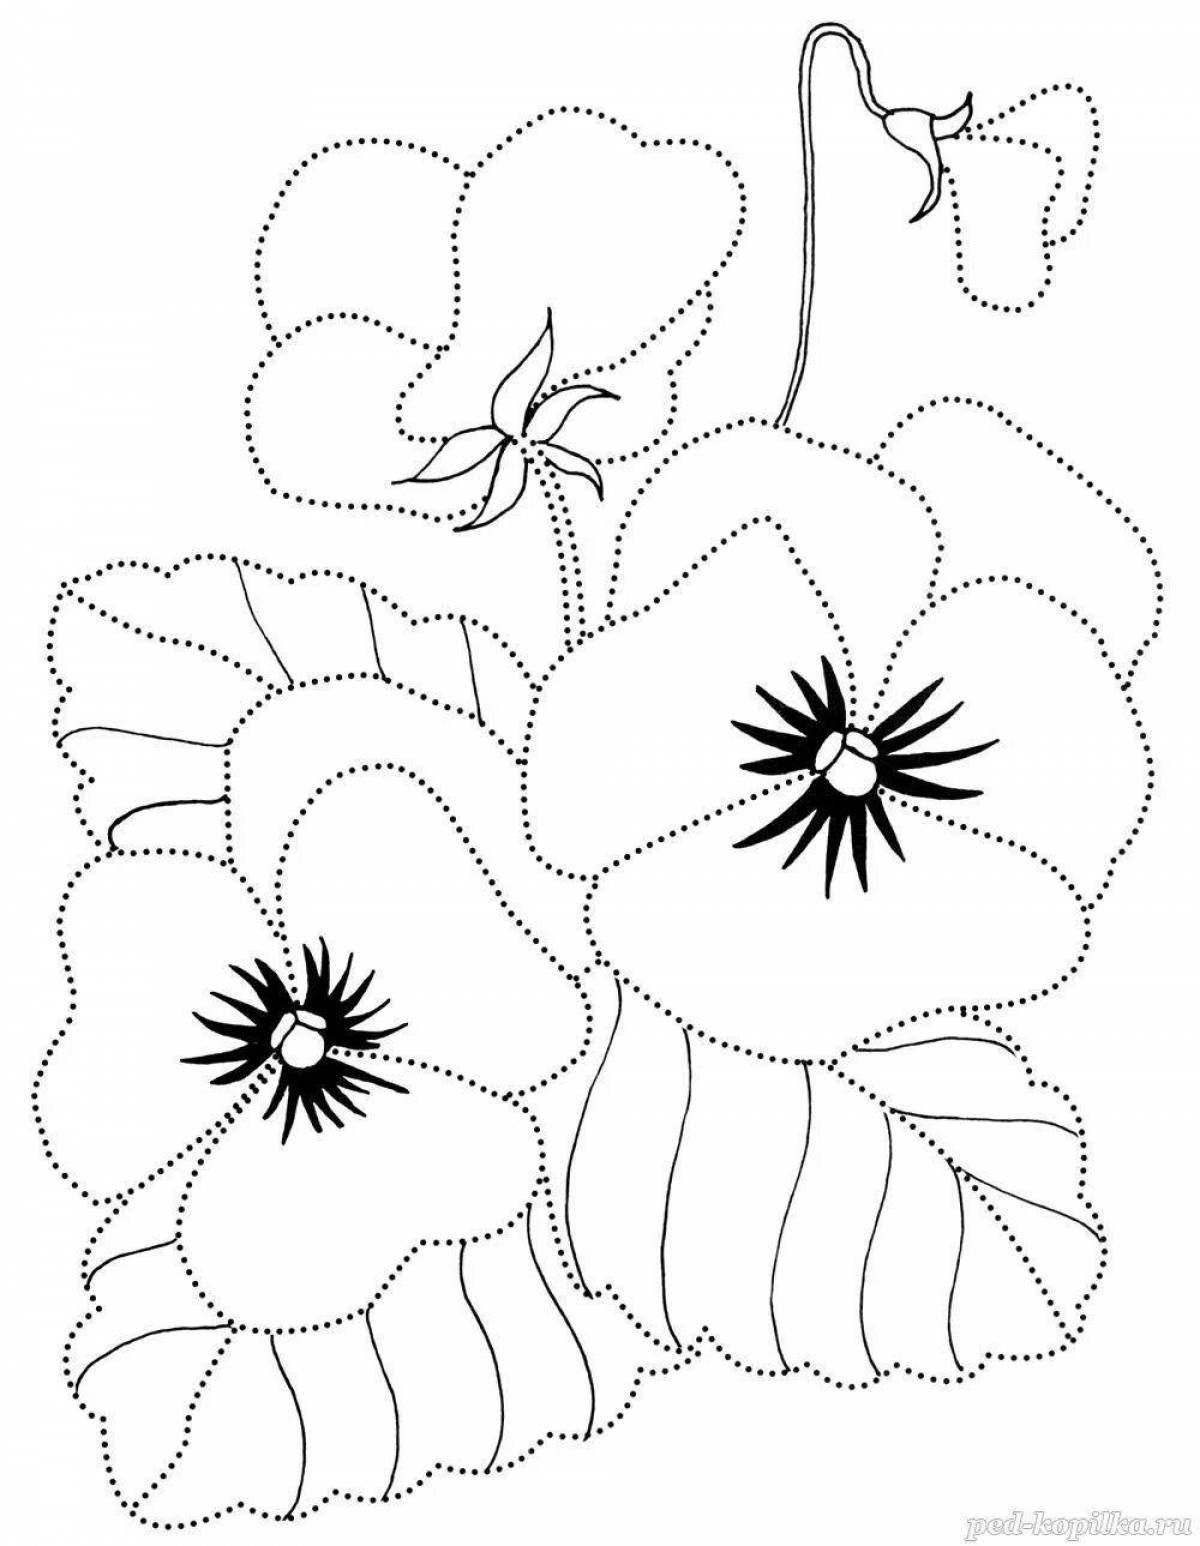 Relaxing coloring book for beginners